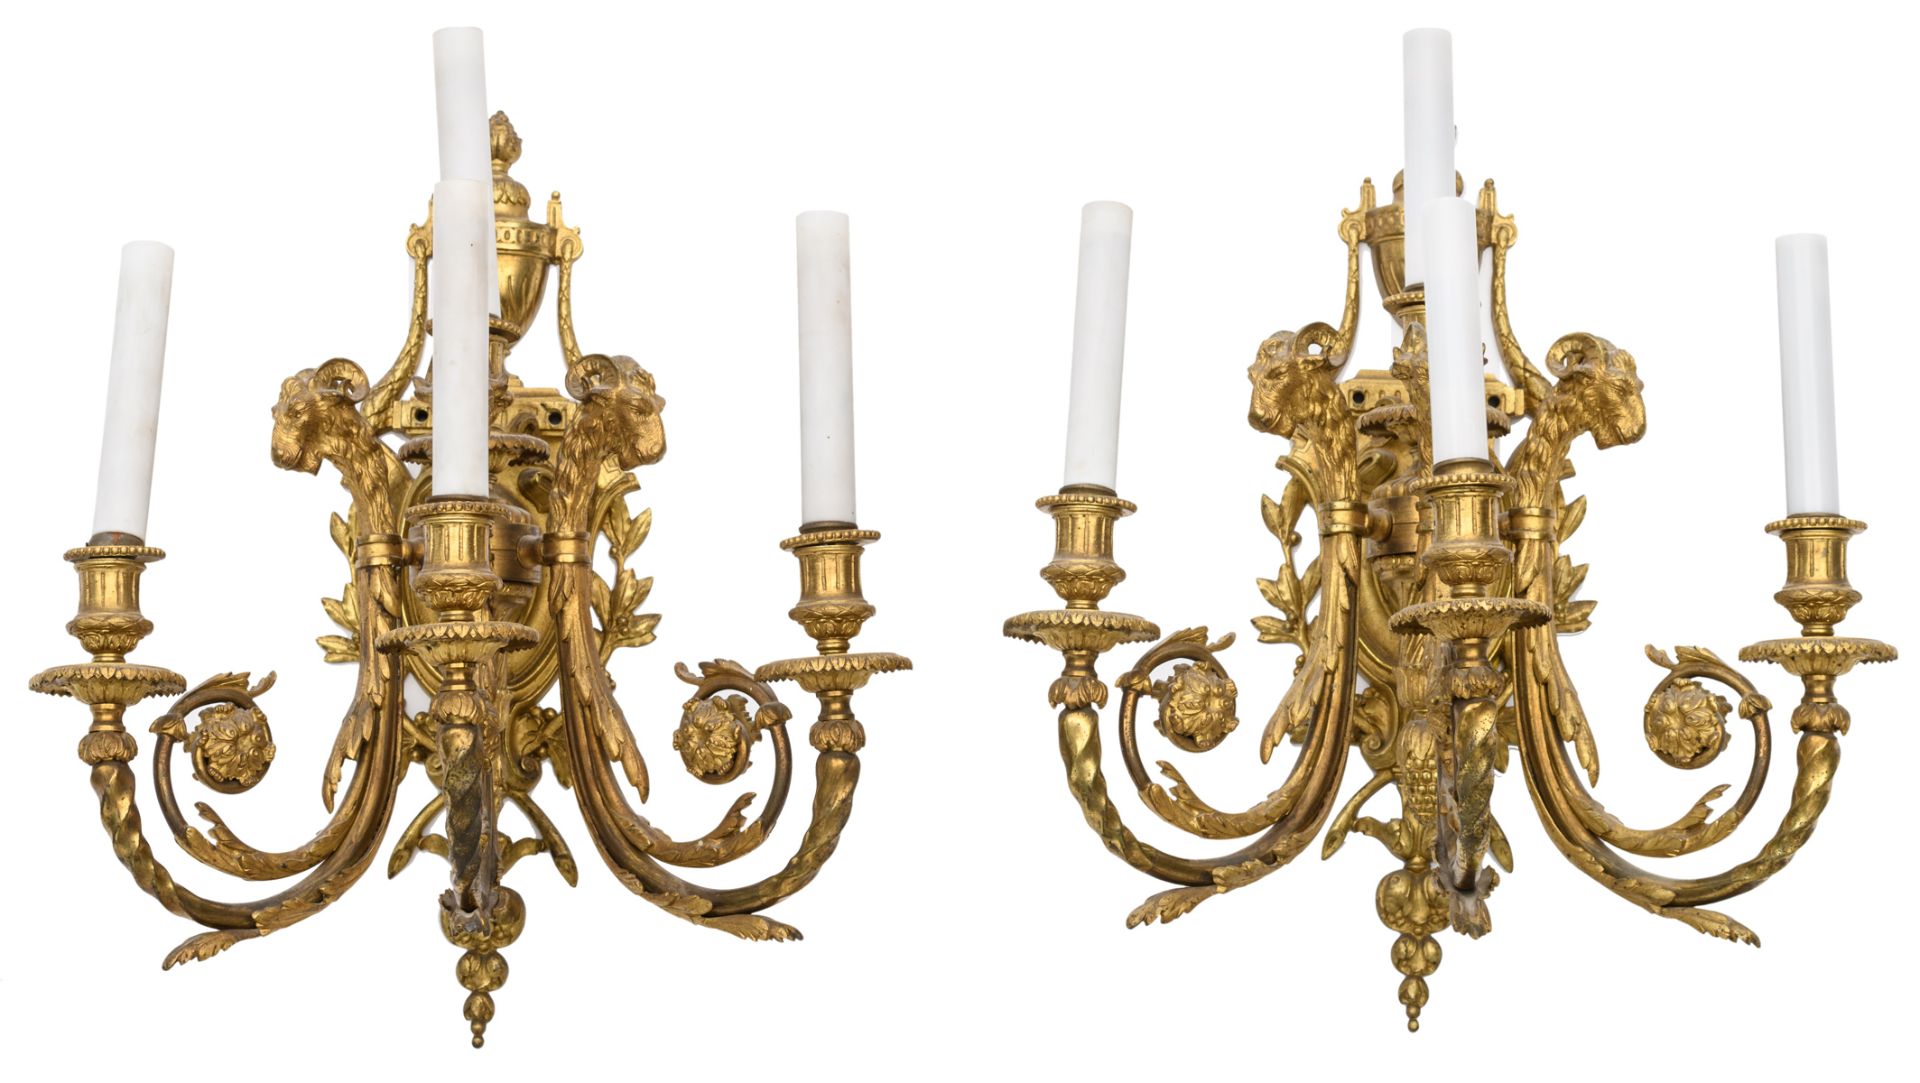 A nice pair of 19thC gilt bronze neoclassical wall sconces, the crest of the arms shaped as rams